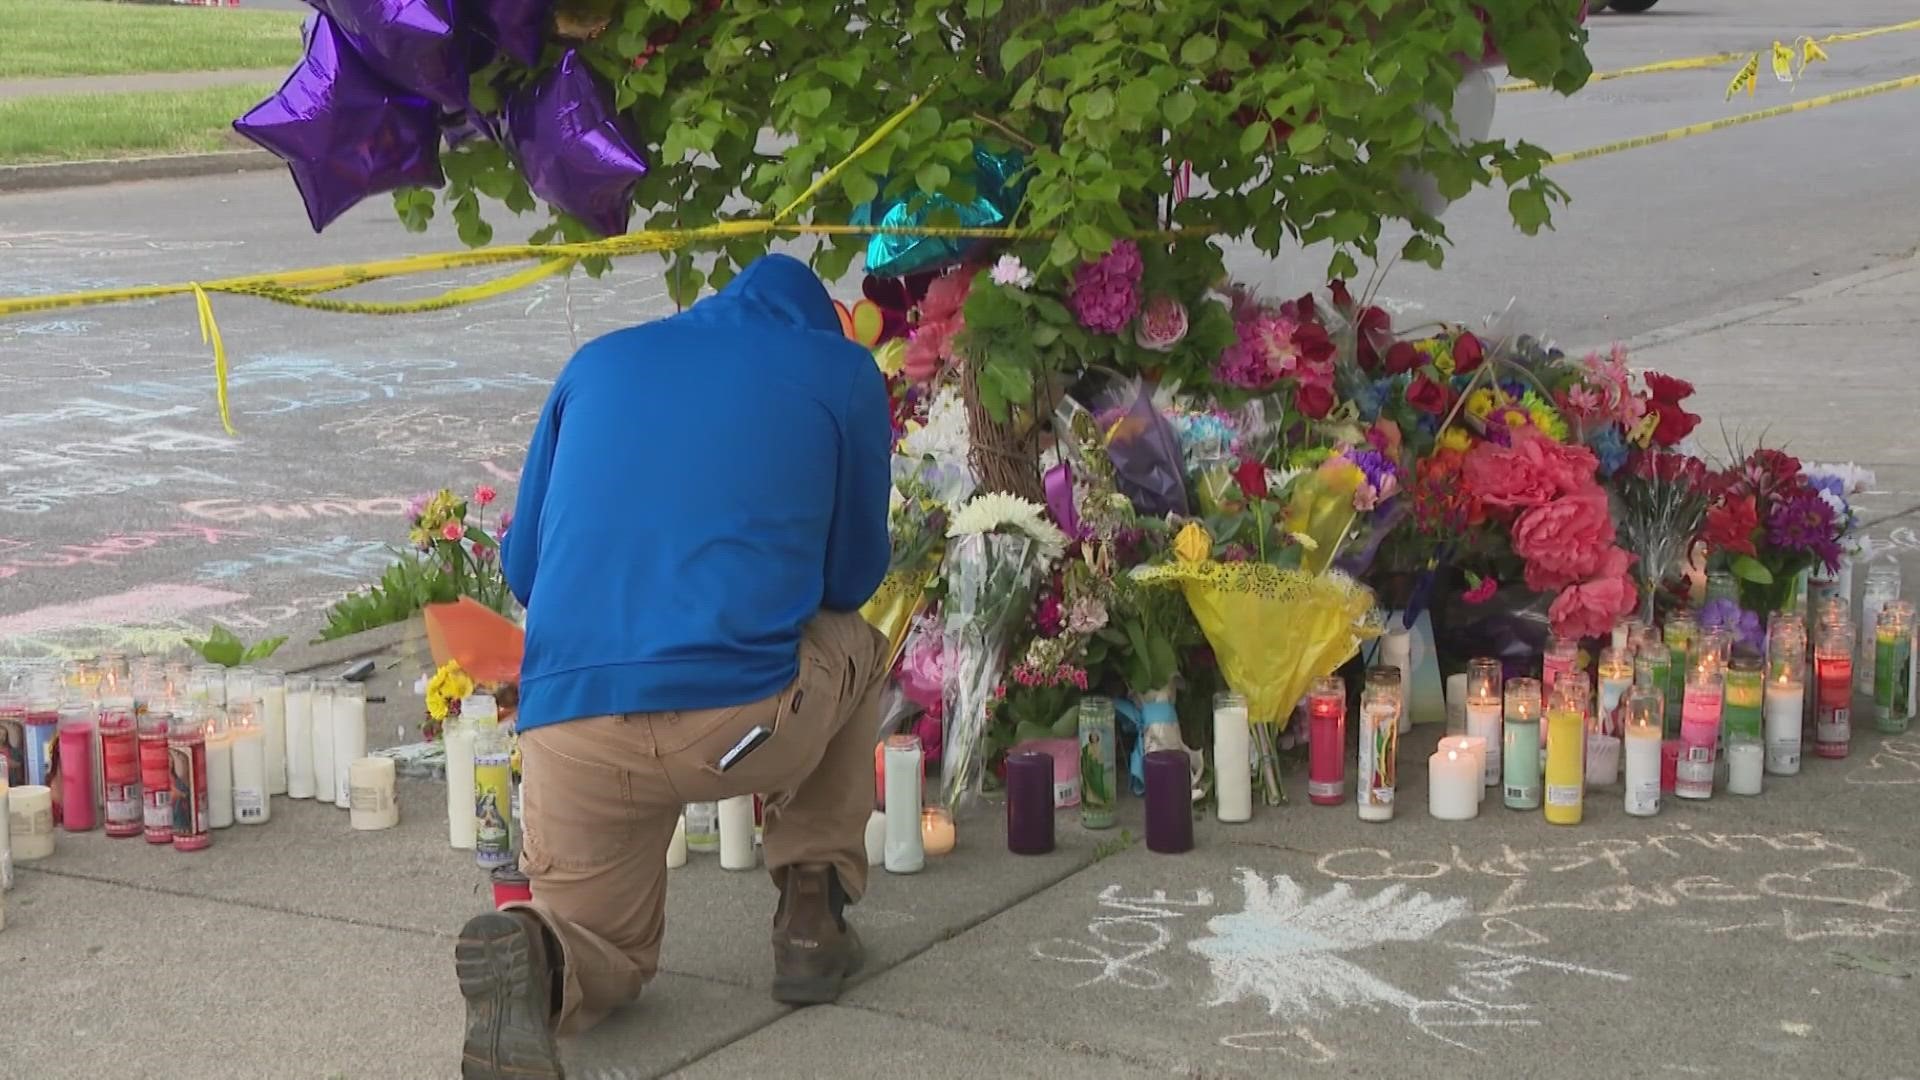 Remembering the victims of the mass shooting in Buffalo